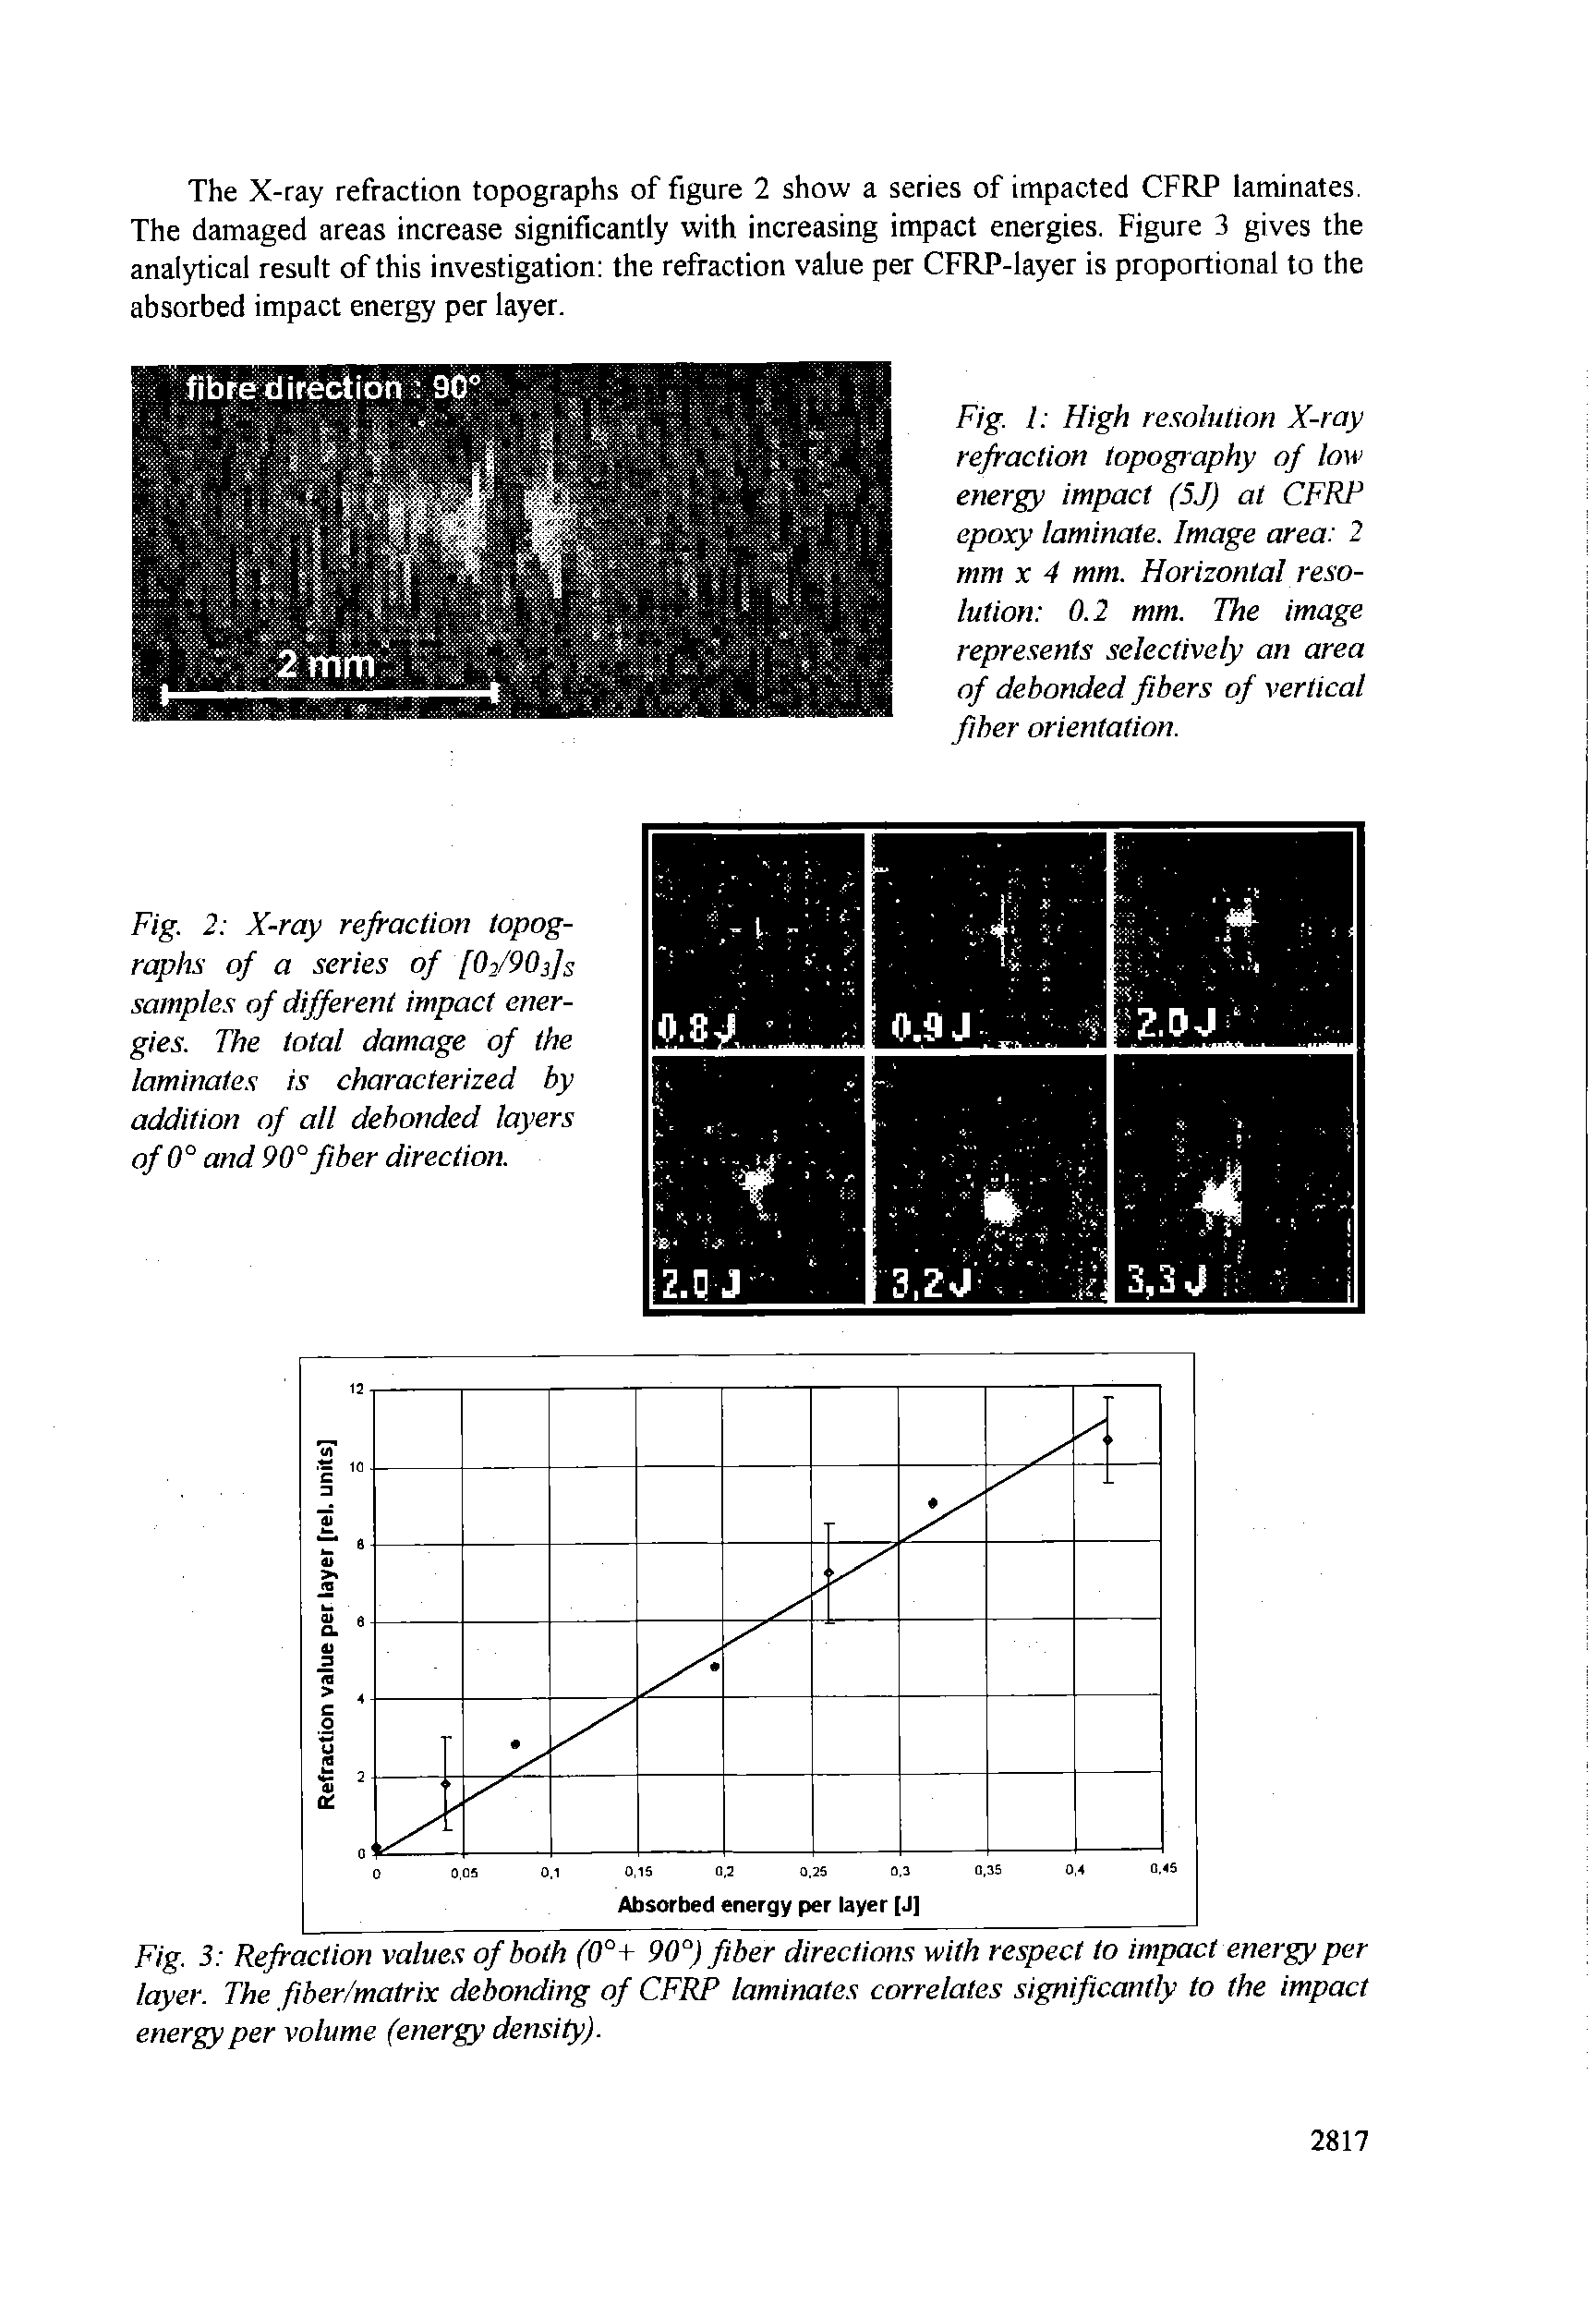 Fig. 1 High re.solution X-ray refraction topography of low energy impact (5J) at CFRP epoxy laminate. Image area 2 mm X 4 mm. Horizontal resolution 0.2 mm. The image represents selectively an area of debonded fibers of vertical fiber orientation.